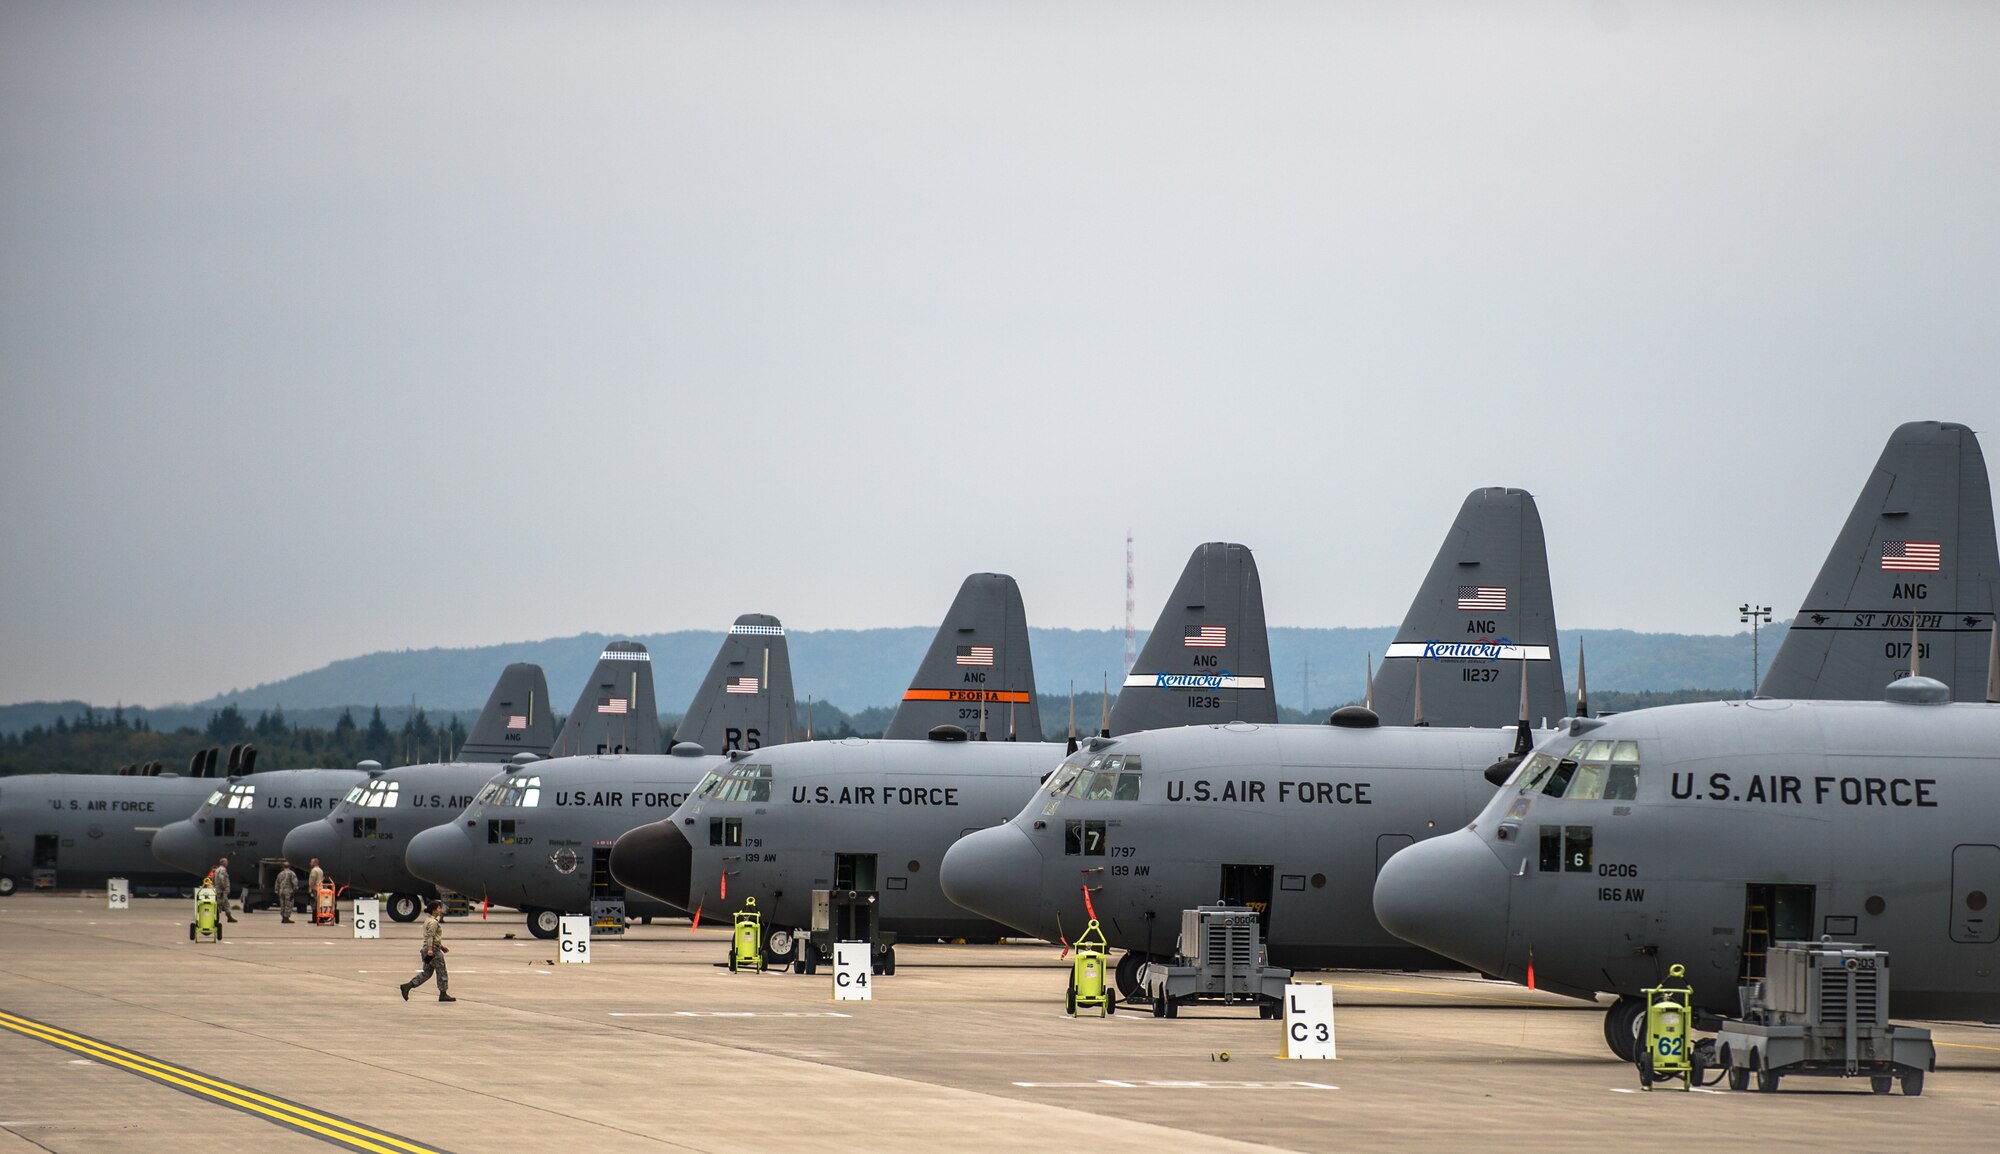 C-130s from the Air National Guard wait on the Ramstein Air Base flightline, Germany, Sept. 3, 2014, just days before they'll be loaded up with Army and Air Force paratroopers to support the Steadfast Javelin II exercise. Steadfast Javelin II is a NATO-led exercise involving more than 2,000 service members from several nations, and takes place across Estonia, Germany, Latvia, Lithuania and Poland. The exercise focuses on increasing interoperability and synchronizing complex operations between allied air and ground forces through airborne and air-assault missions. (U.S. Air Force photo/ Airman 1st Class Jordan Castelan)